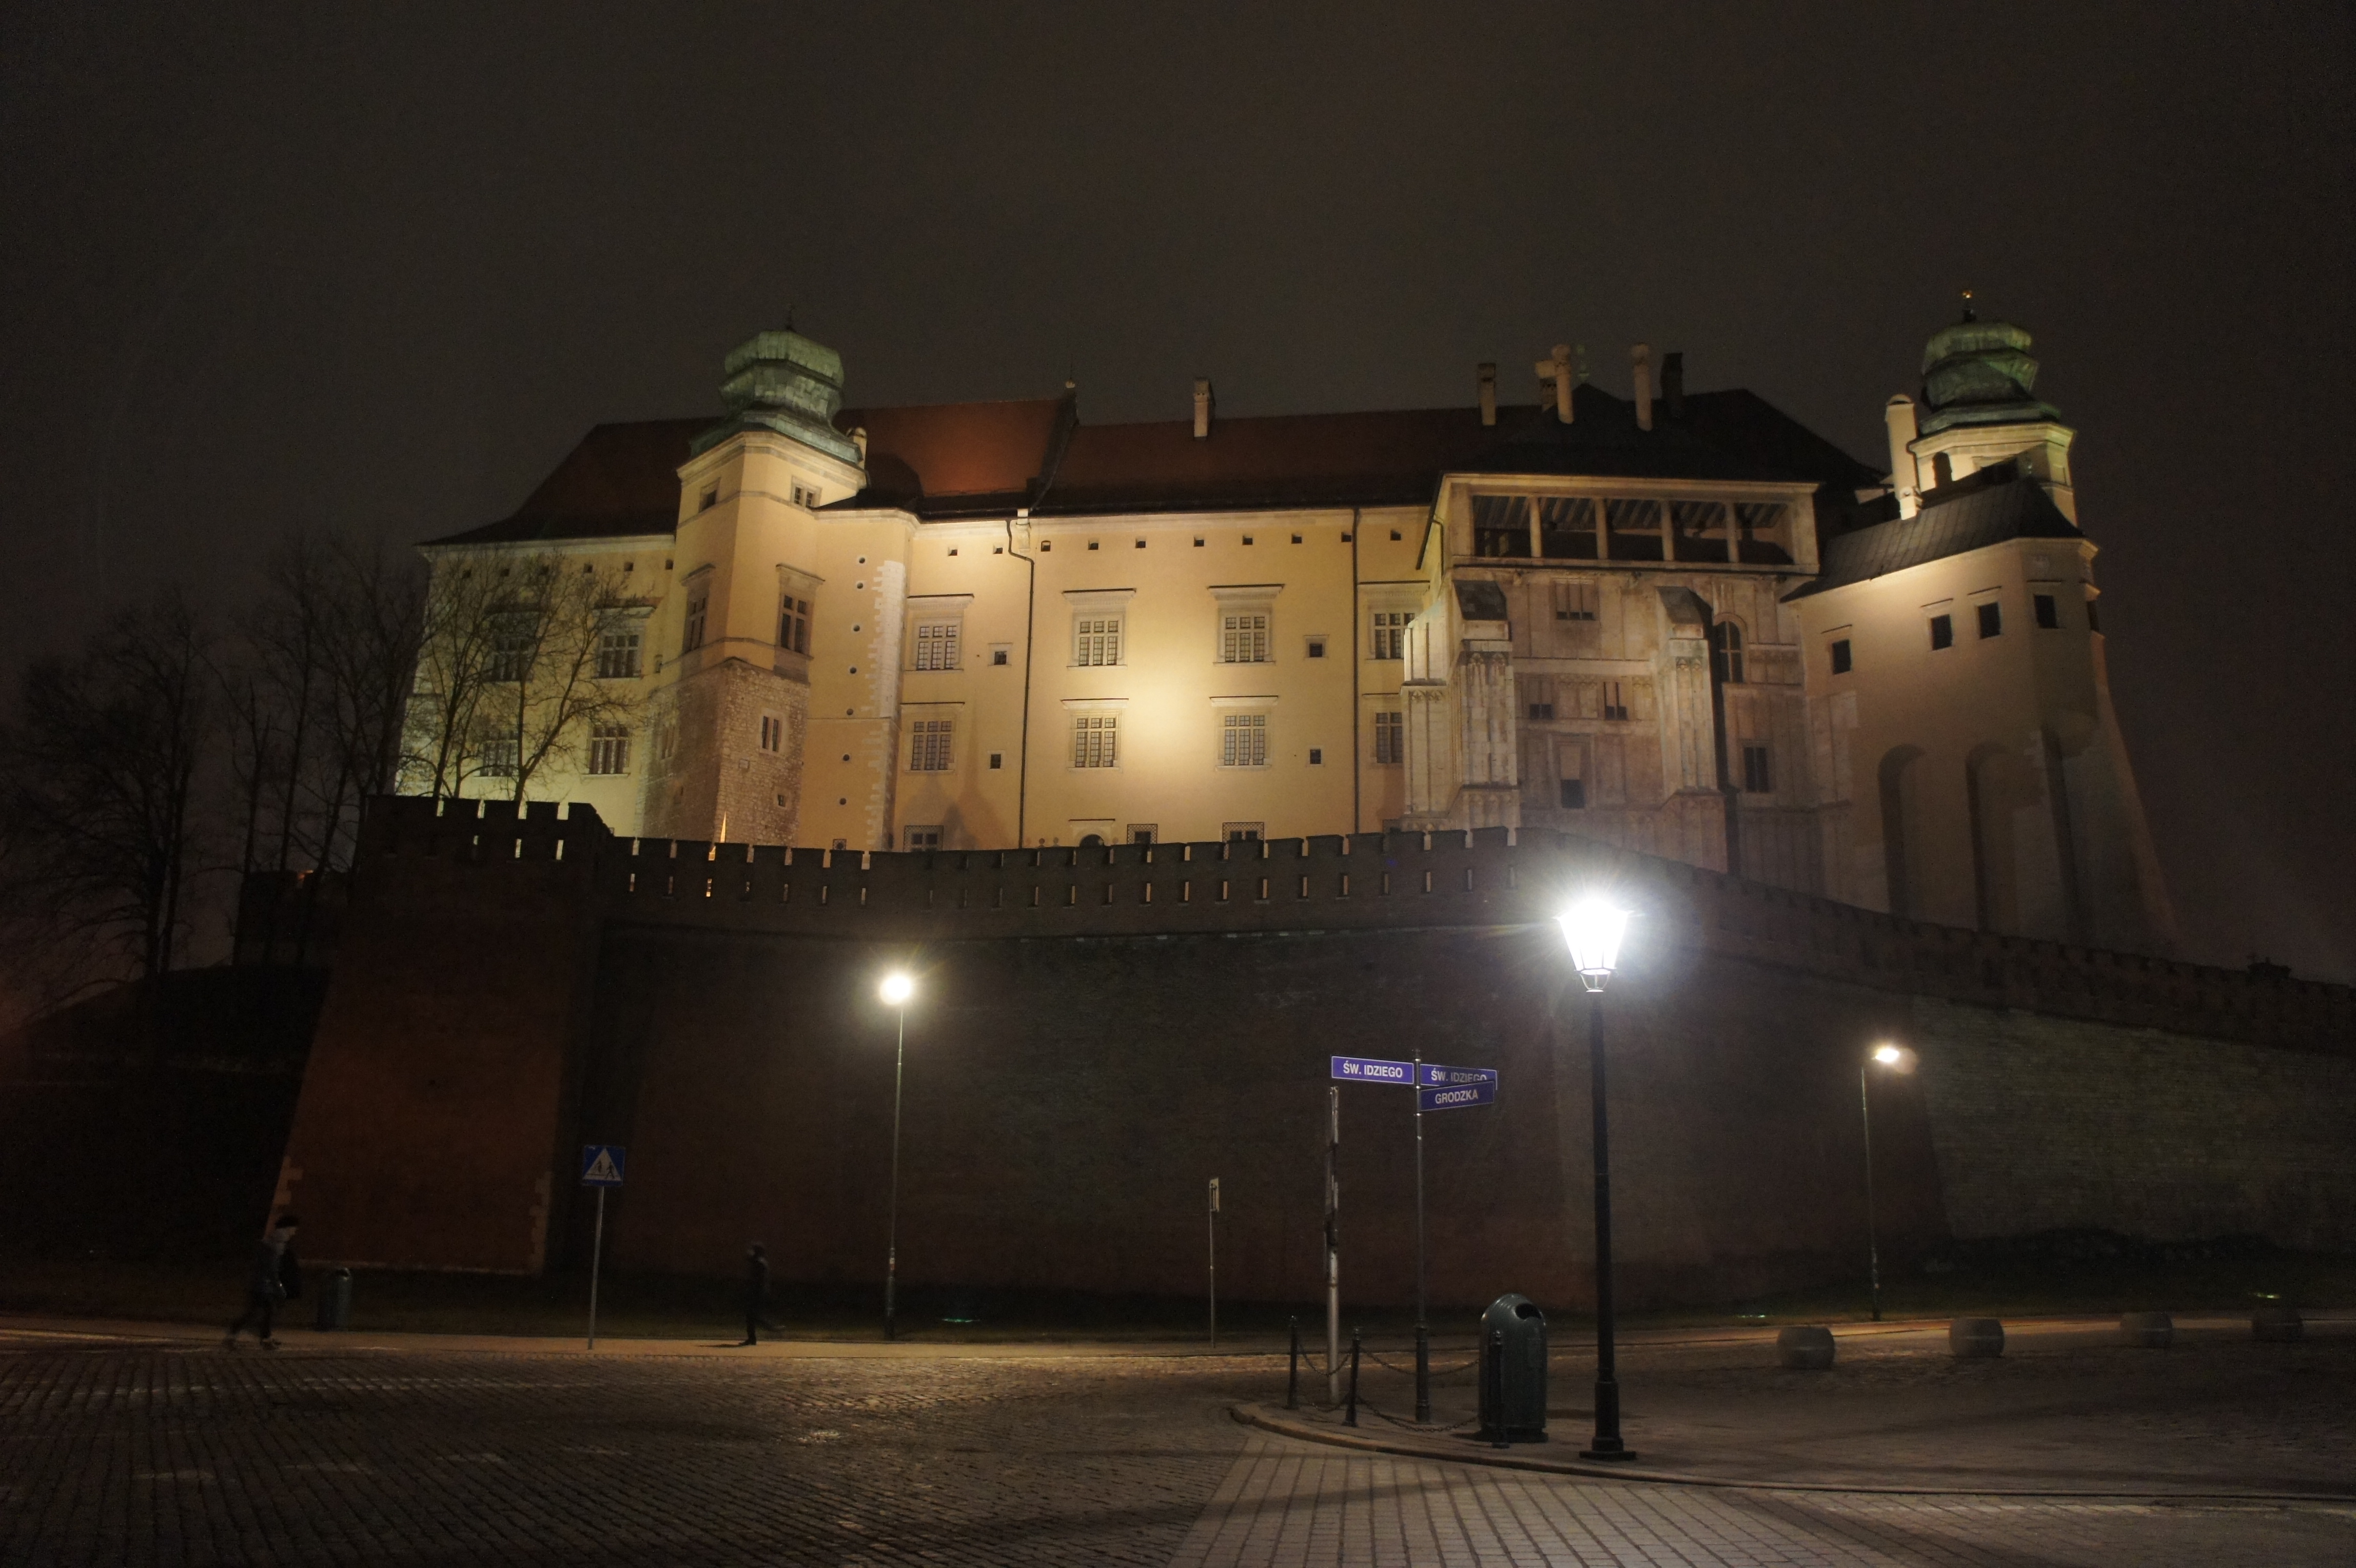 Wawel hill by night. Our hostel is 200 m from here.